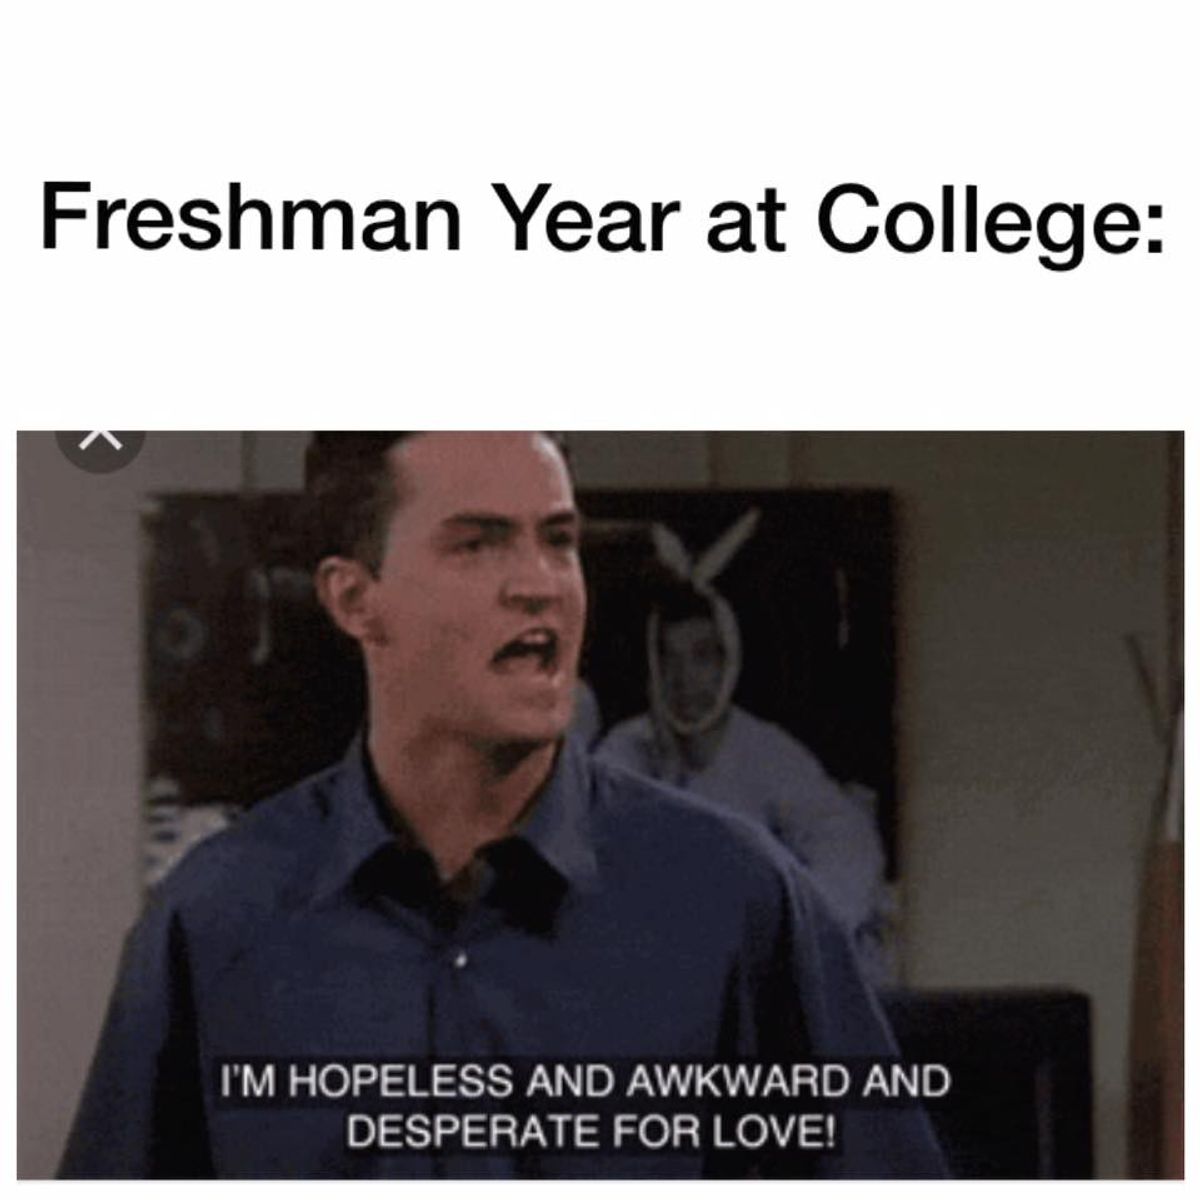 15 Things You Shouldn't Regret About Your Freshman Year Of College